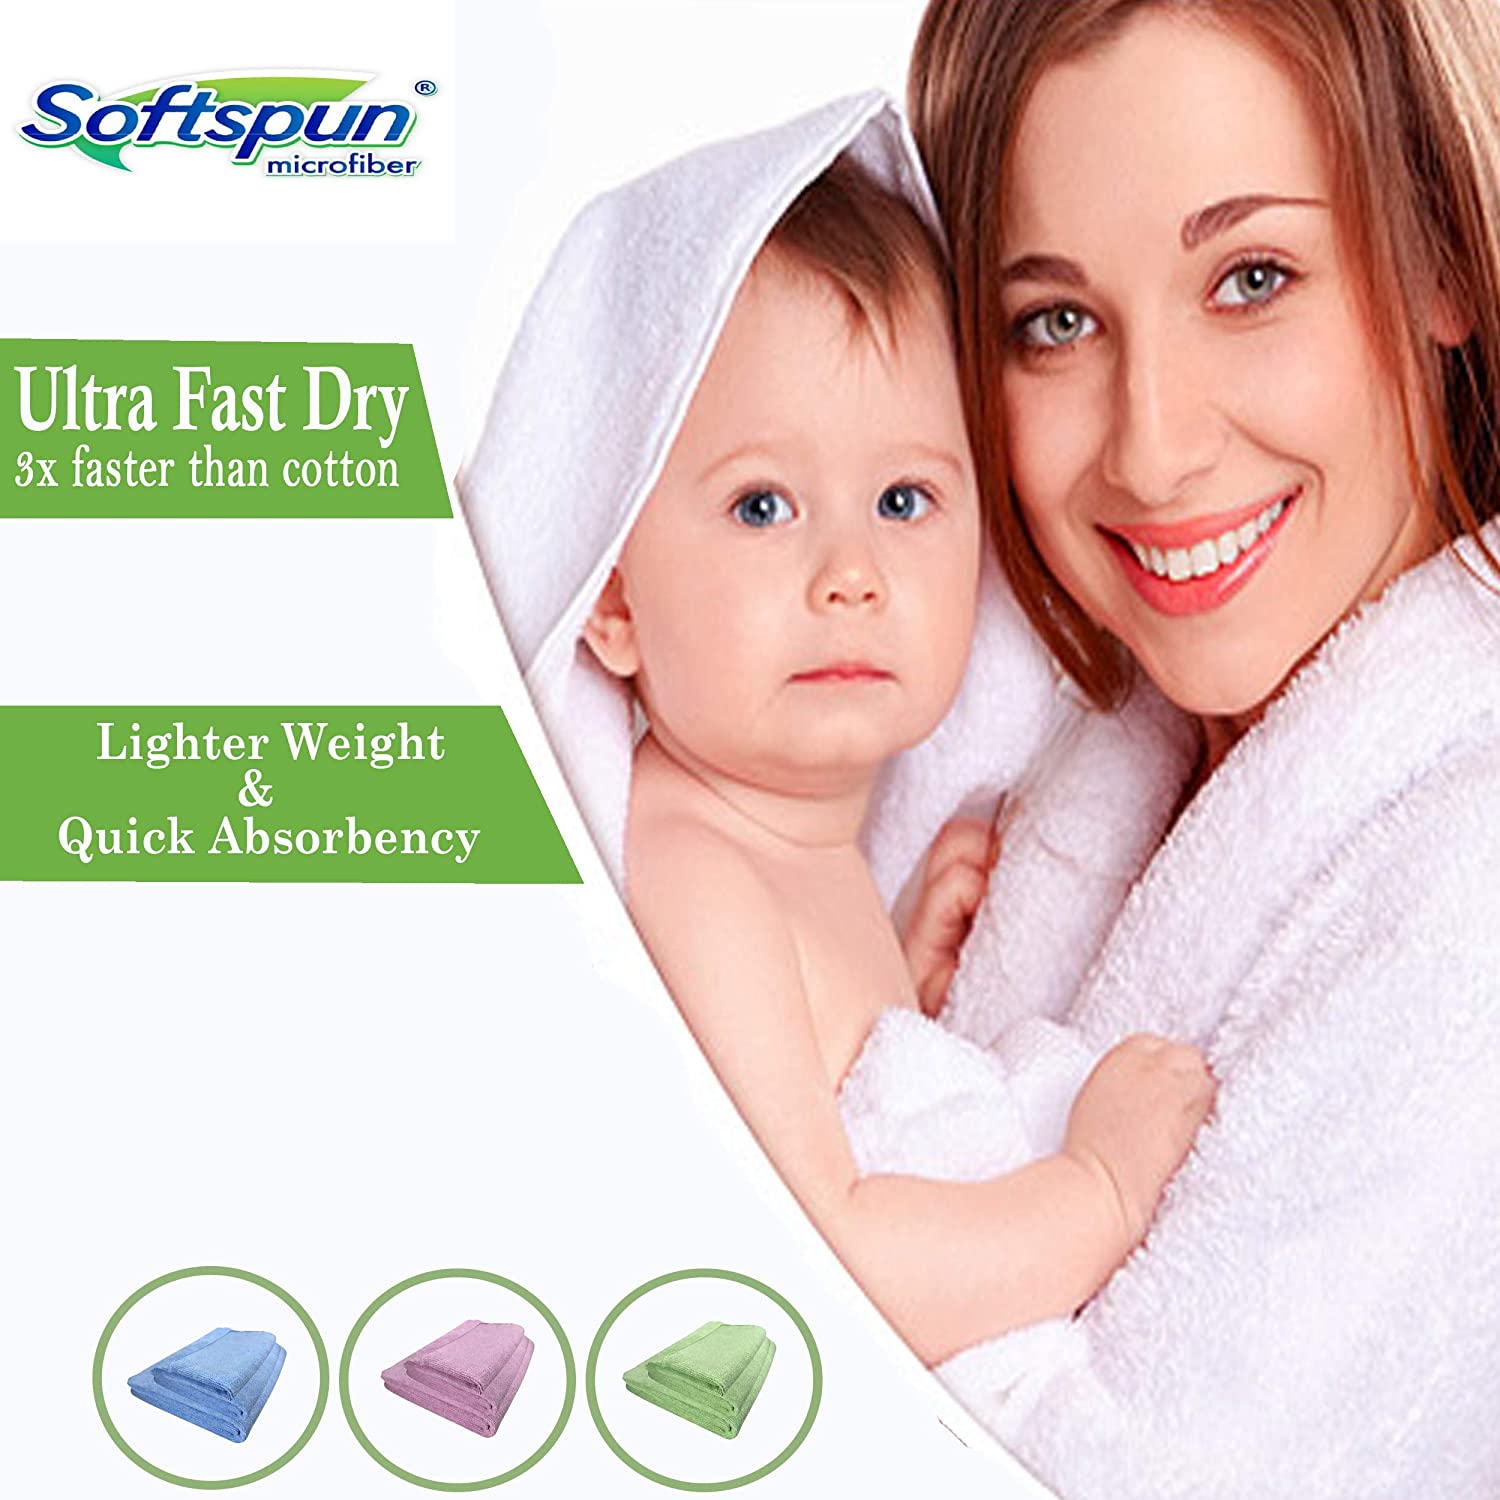 SOFTSPUN Microfiber Baby Hand & Face Wipes Towel 30x30cm 340 GSM Super Soft & Silky for Hand, Face and Body - Hypoallergenic Sensitive Skin Wipes & Washcloths.